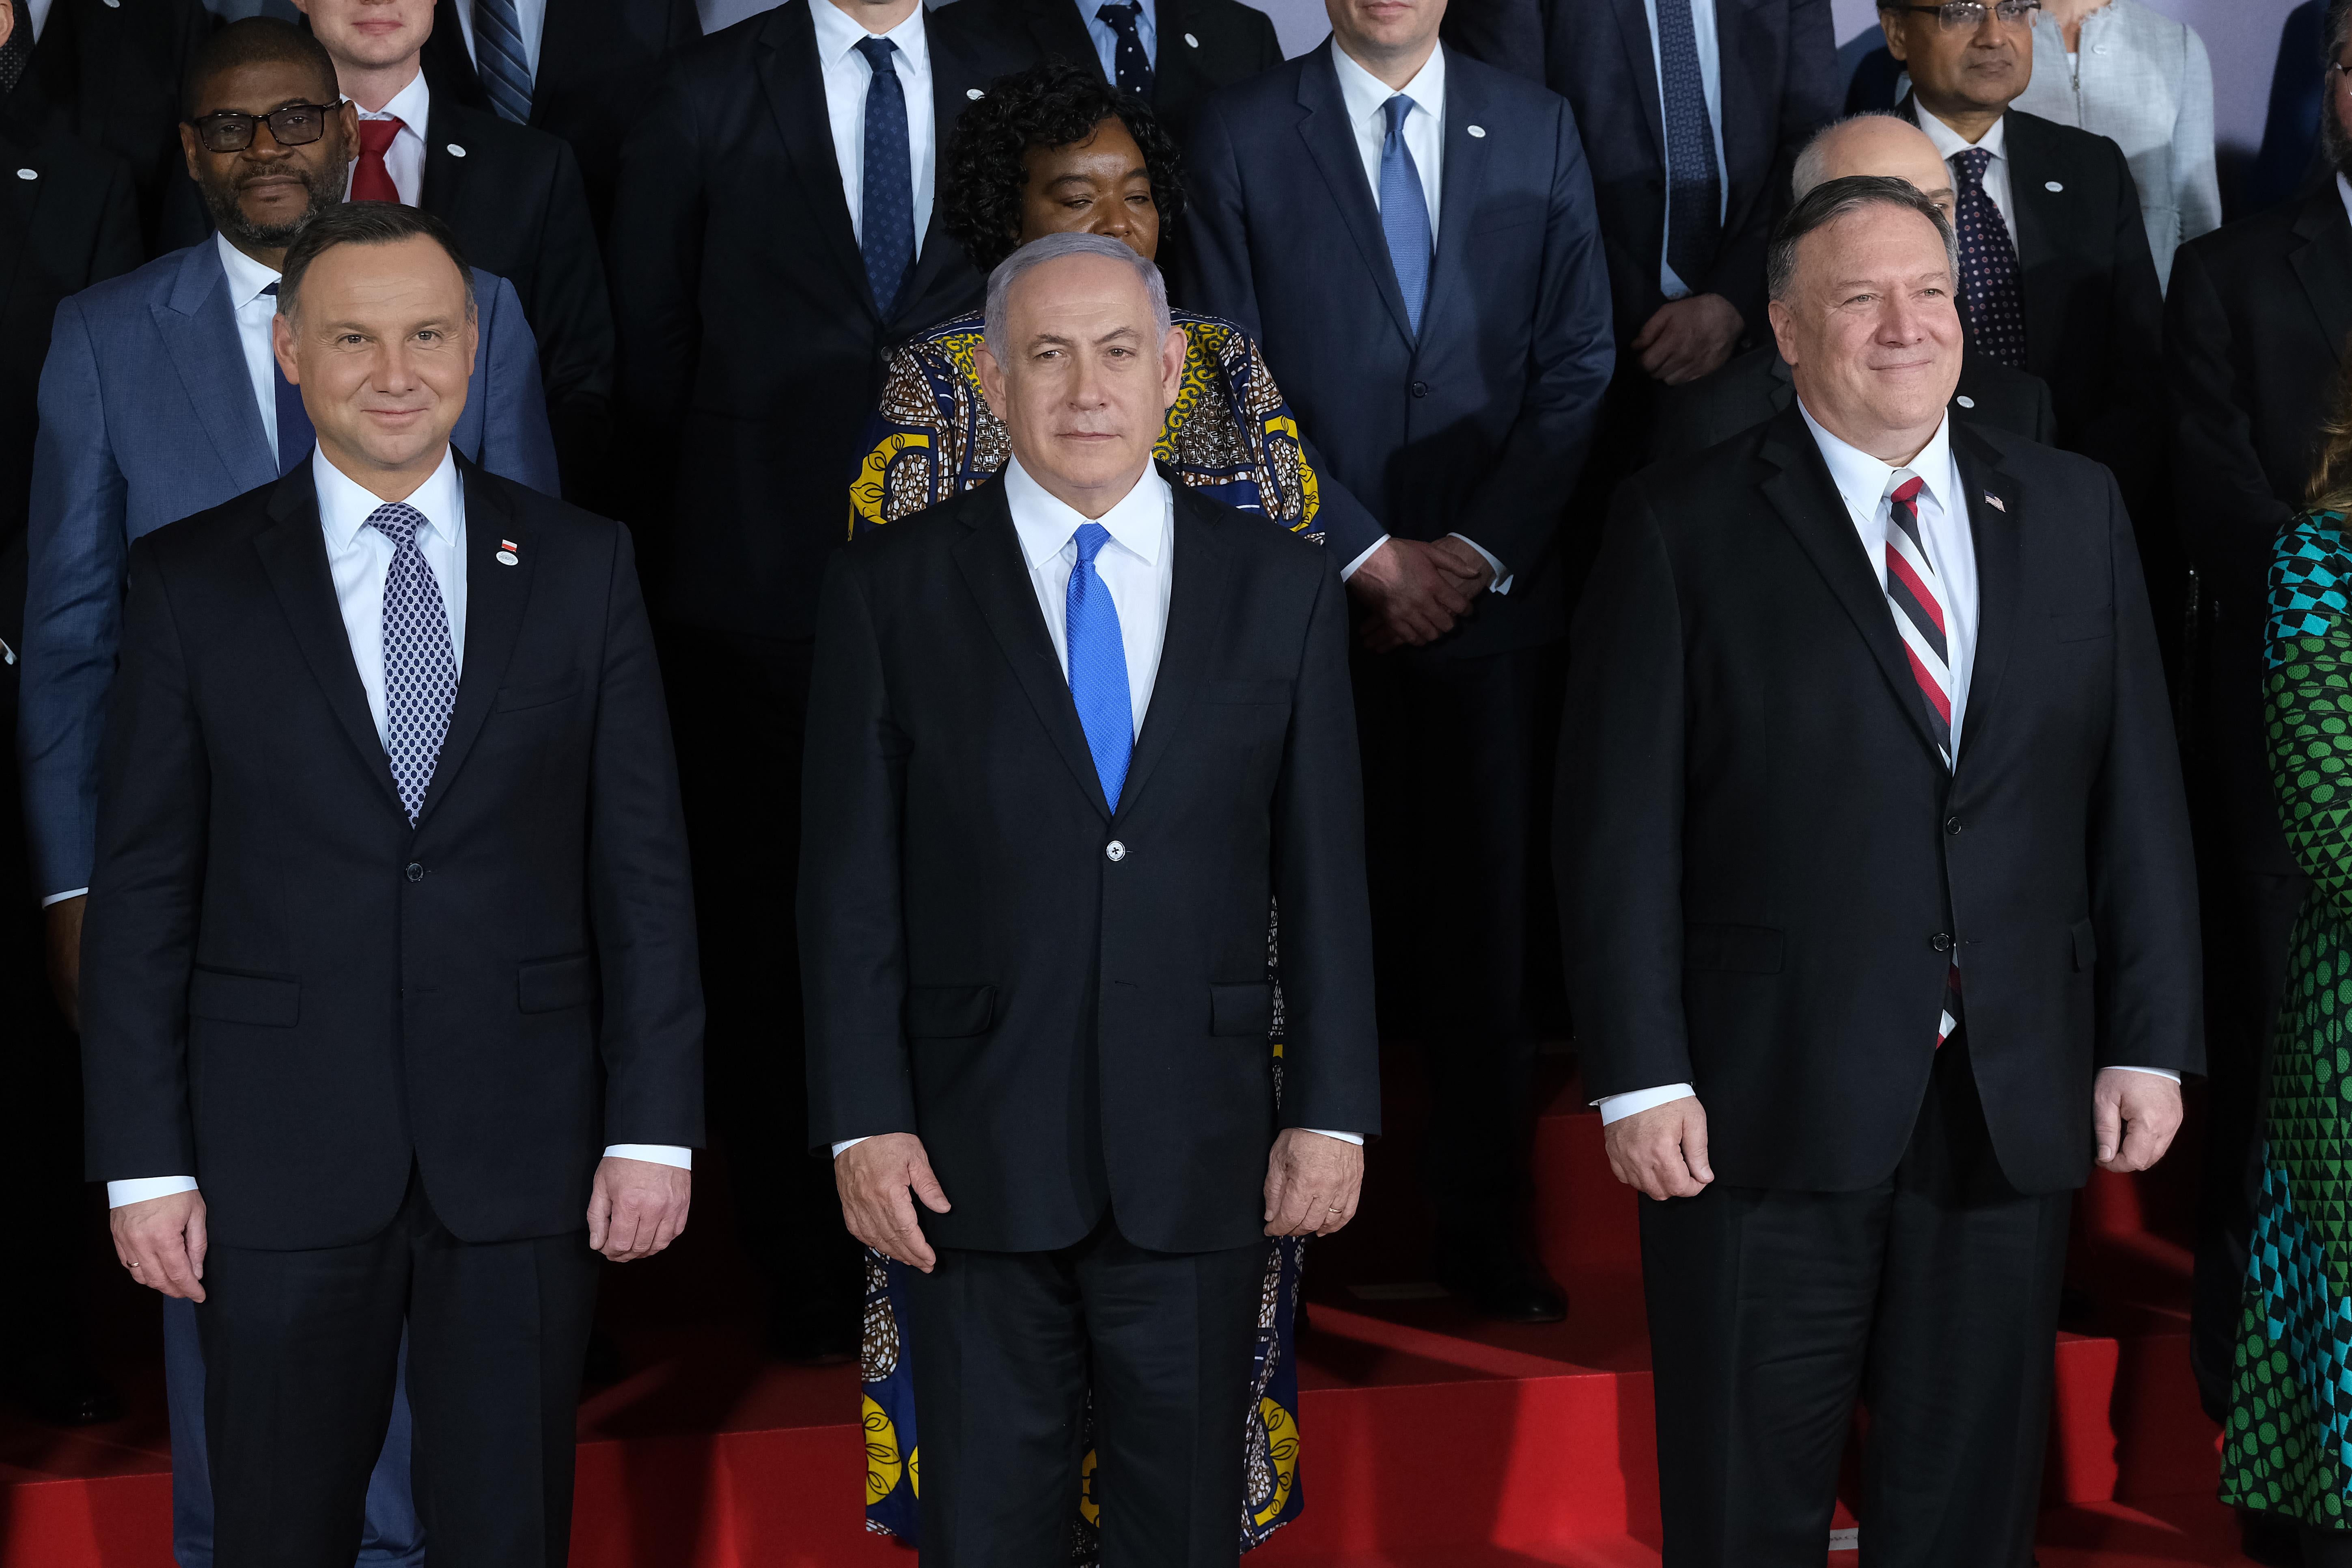 Andrzej Duda, Benjamin Netanyahu, and Mike Pompeo wearing suits and posing for a group photo.